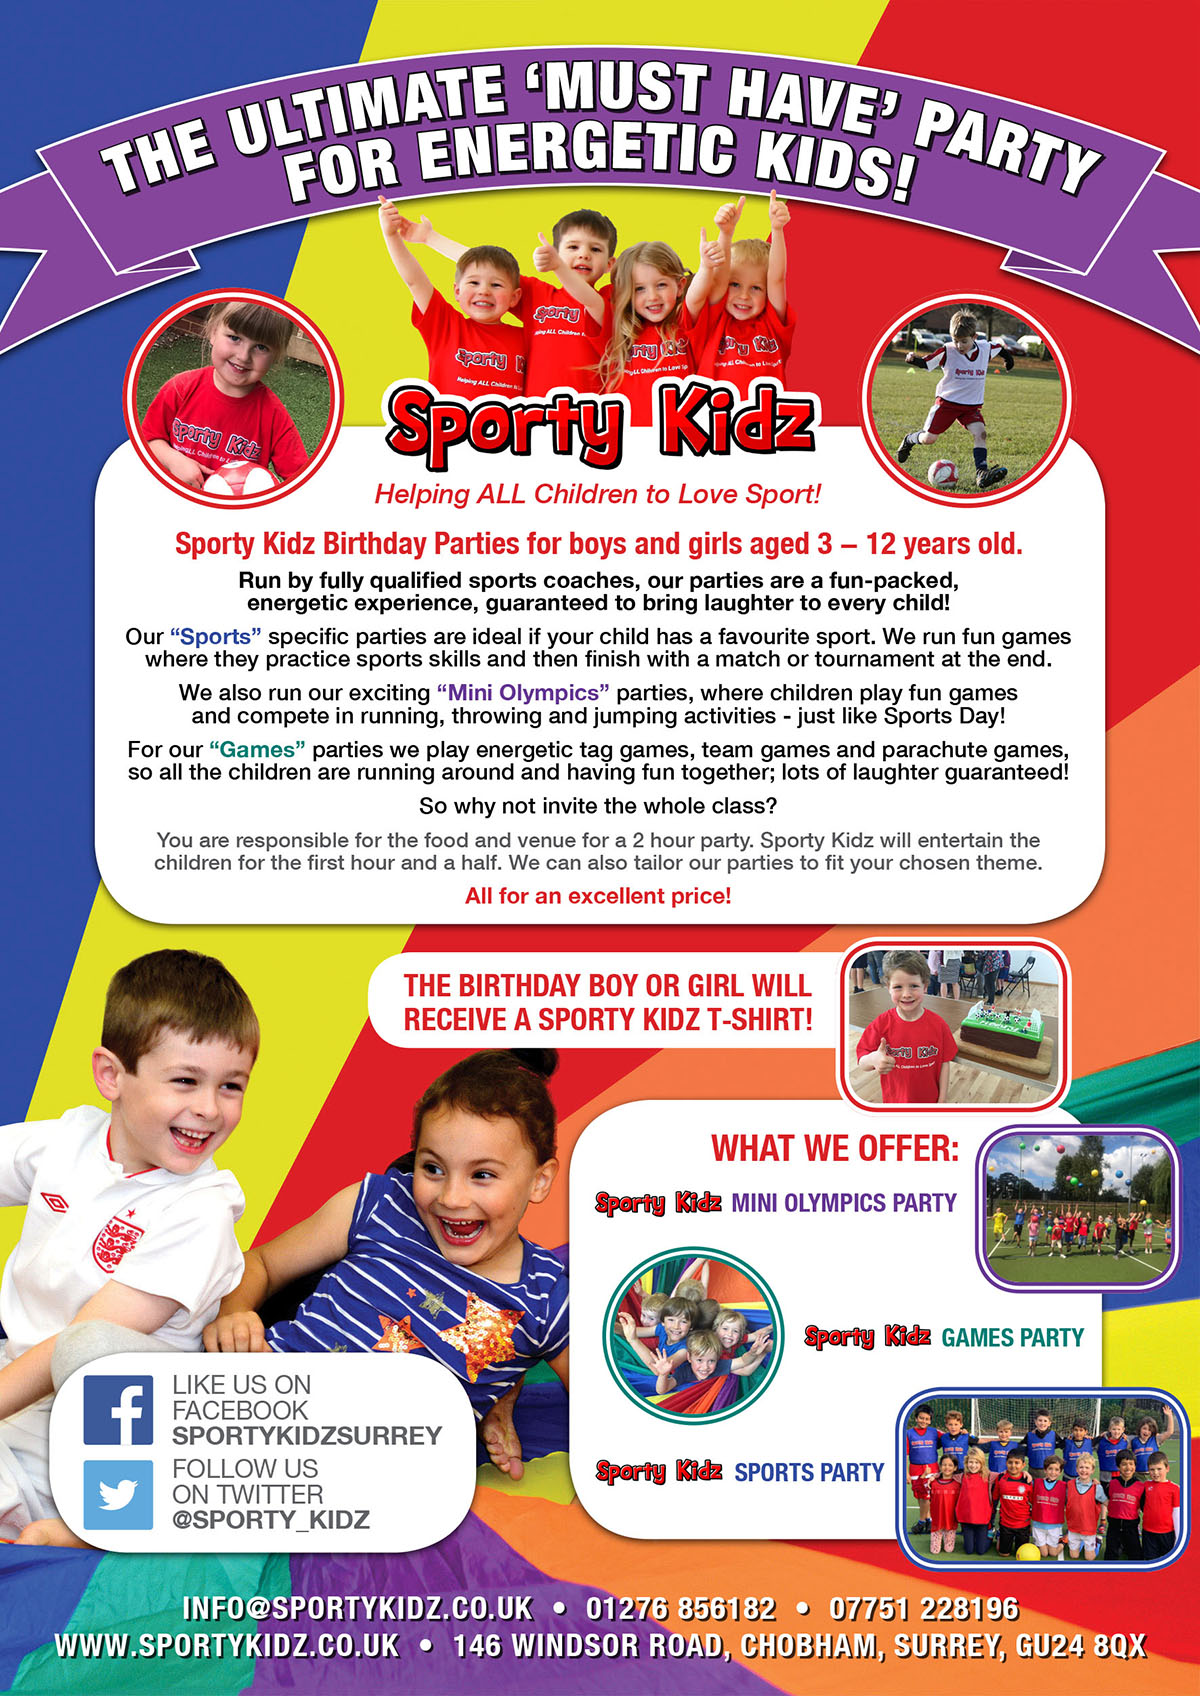 Sporty Kidz Birthday Parties for boys and girls aged 3 - 12 years old